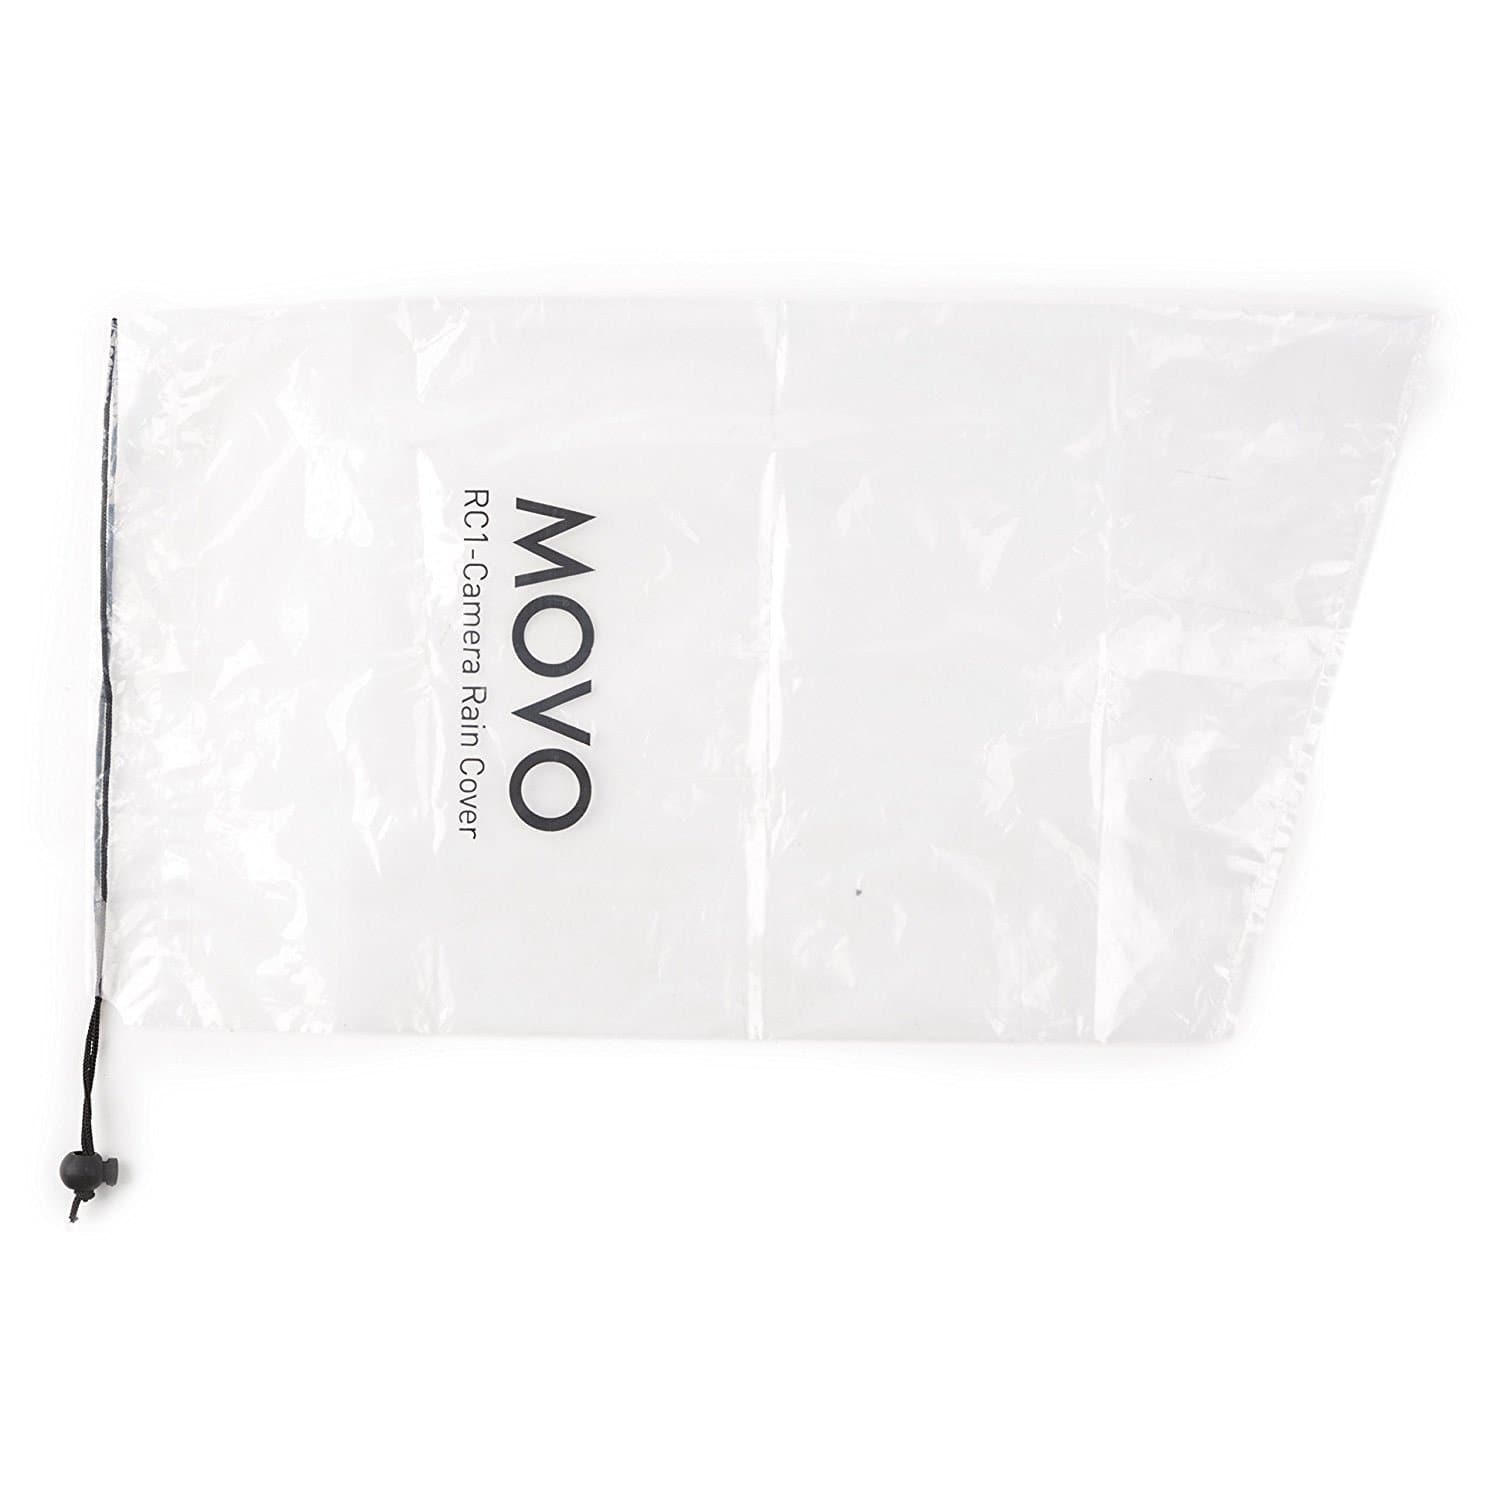 10x Clear Rain Cover for DSLR Camera & Lens up to 18" Long - Movo